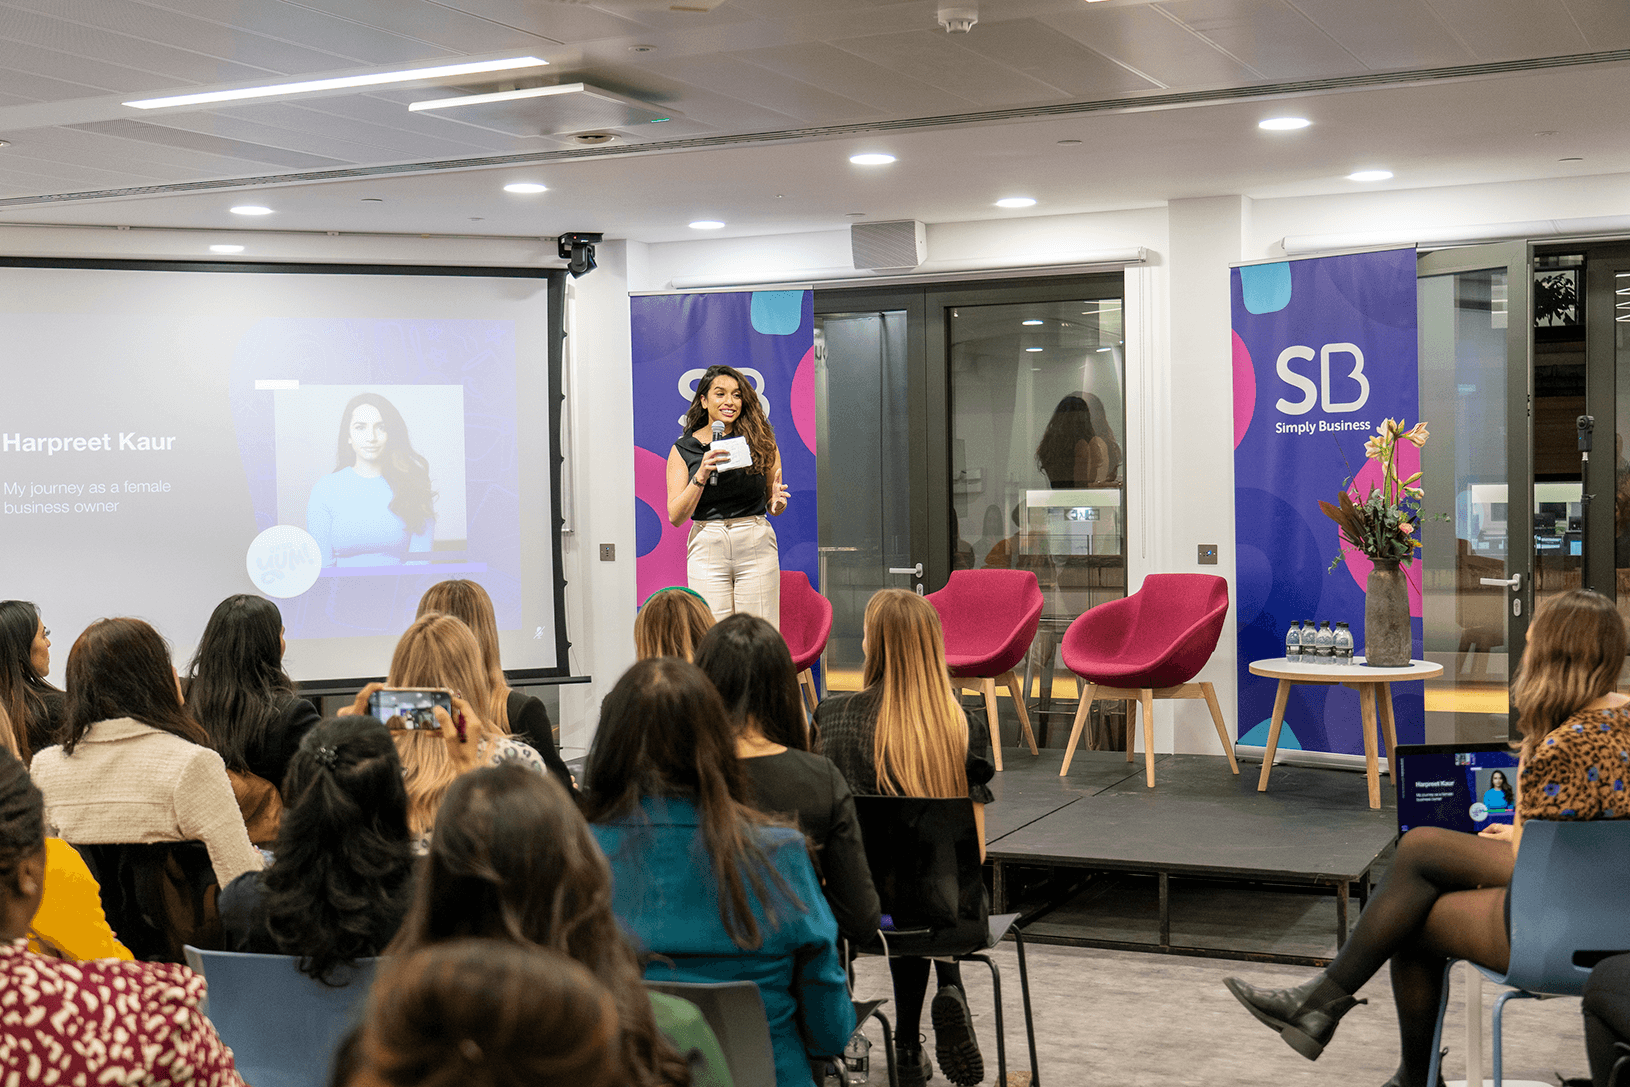 Harpreet Kaur on stage at women in business networking event